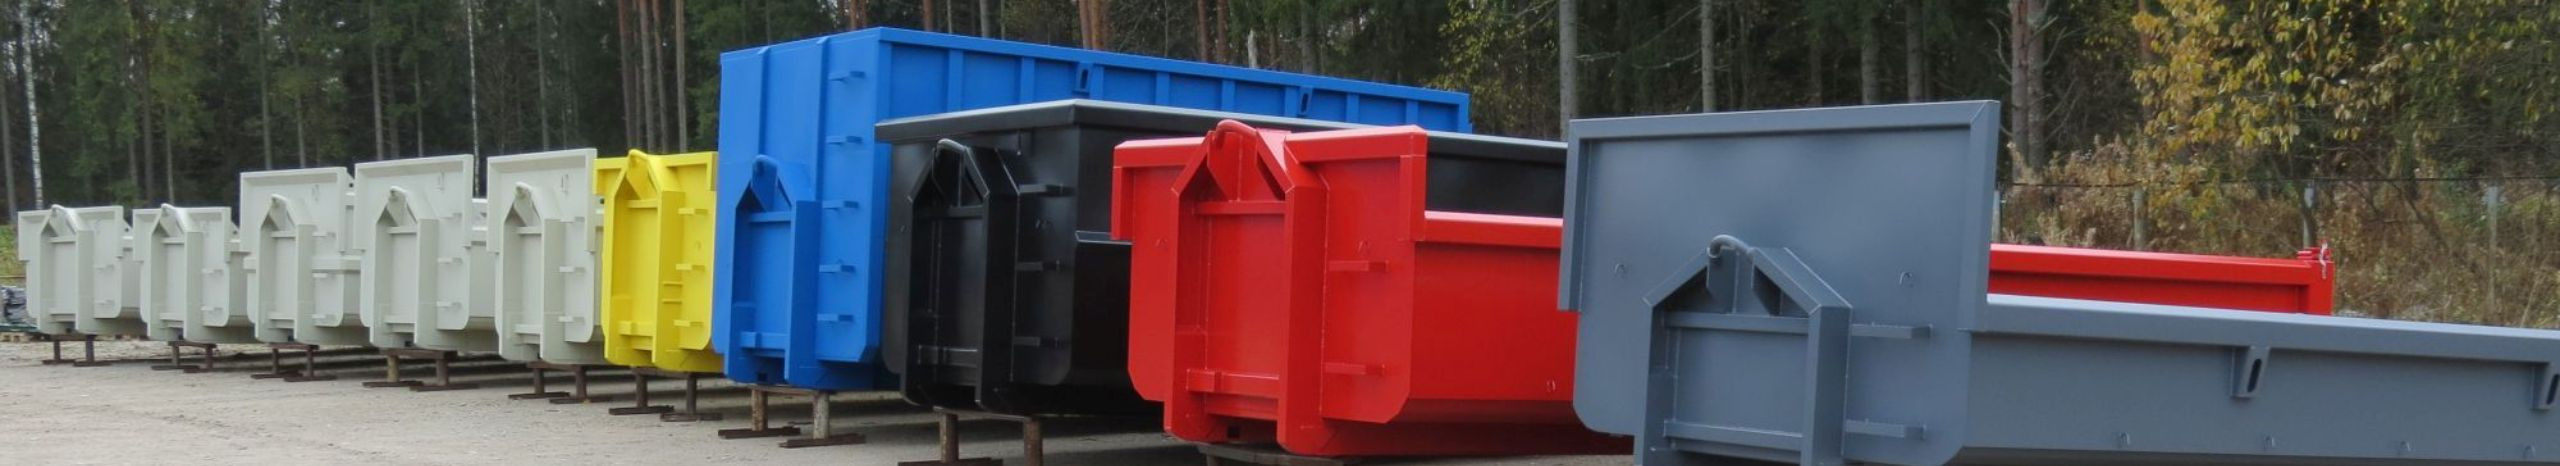 trailers, exchange boxes, steelwork services, wood products, fruit, silage, gravel trailers, multilift boxes, containers, trailers for fruit transport, silage trailers, ball-drawing trailers